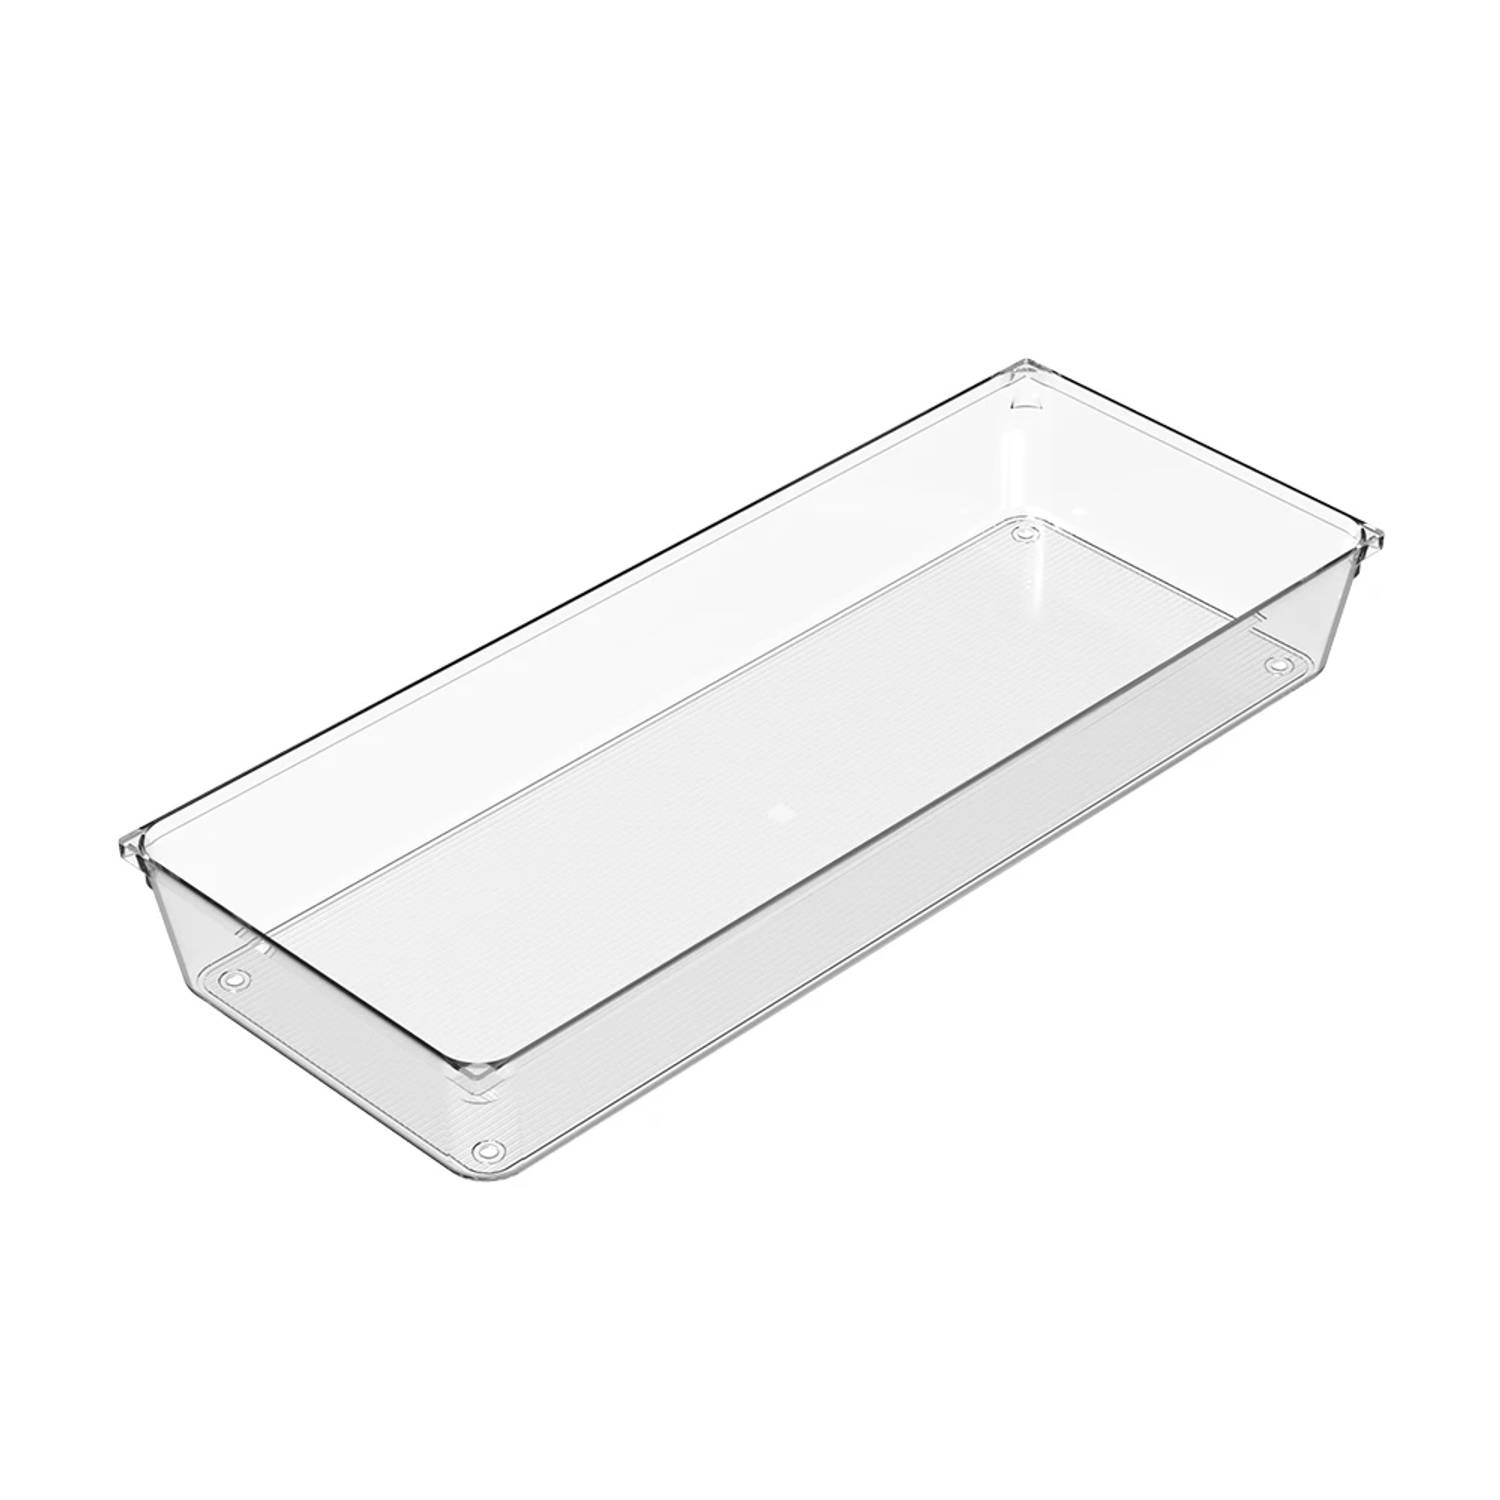 So Clever Ladebakjes 5.1 cm hoog Classic Clear - 15 x 38 cm (H)